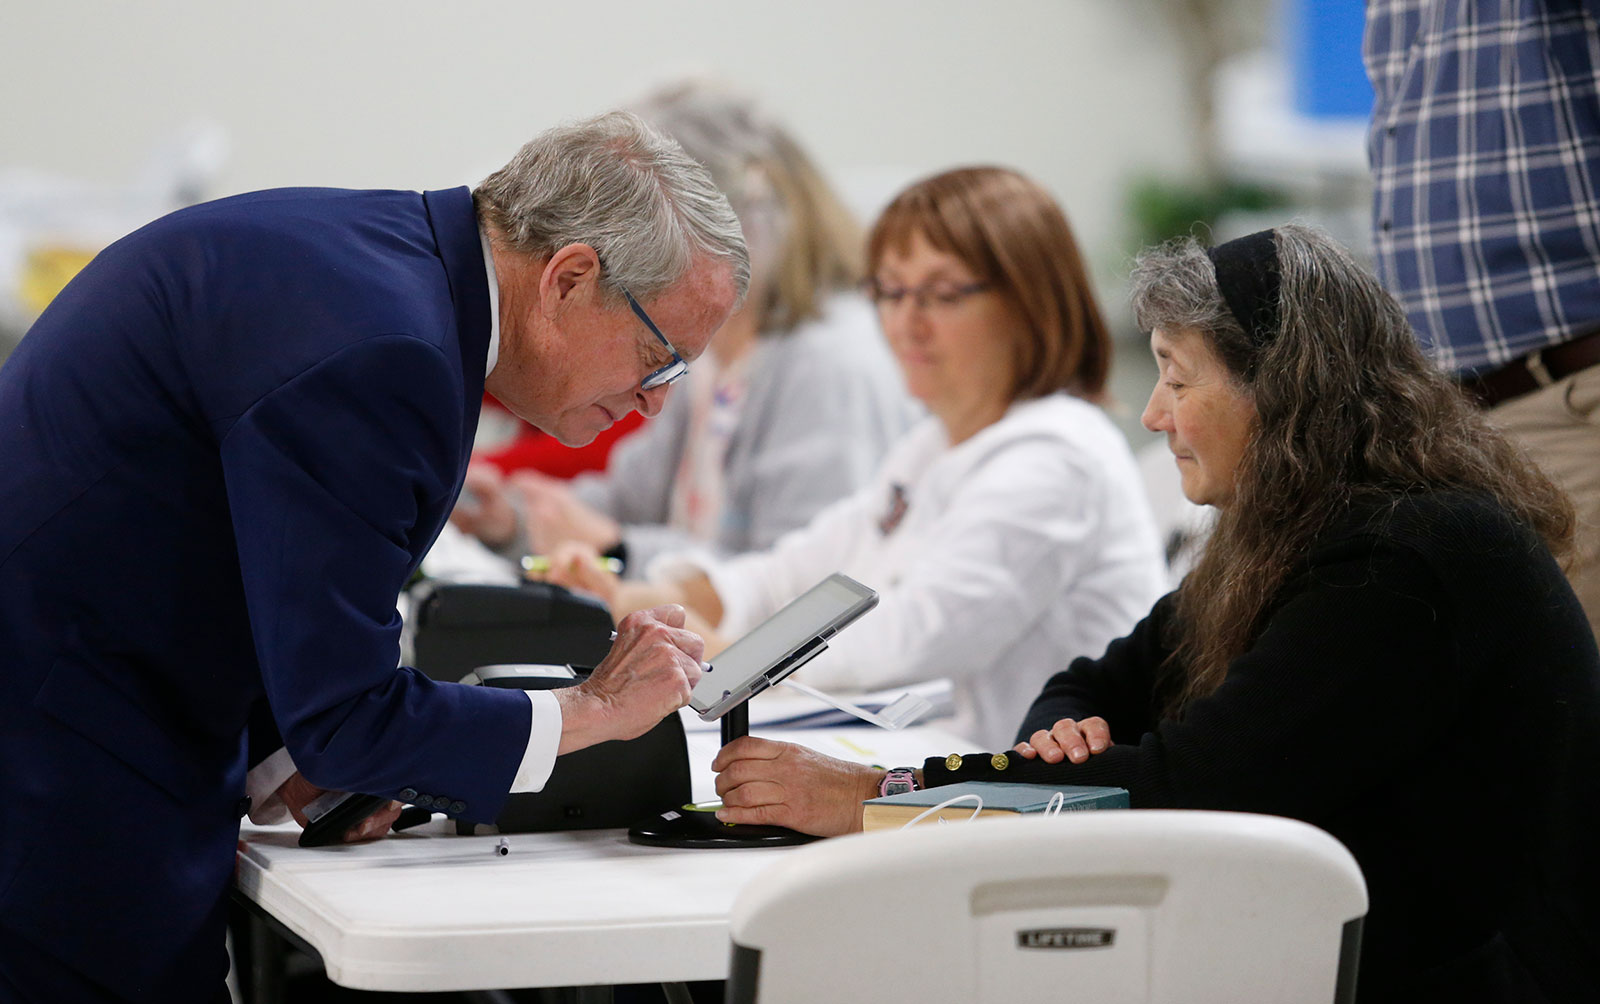 Ohio Governor Mike DeWine, left, signs for his vote in front of district attorney Tonya Veldt as he prepares to vote in Cedarville, Ohio, on Tuesday, May 3.